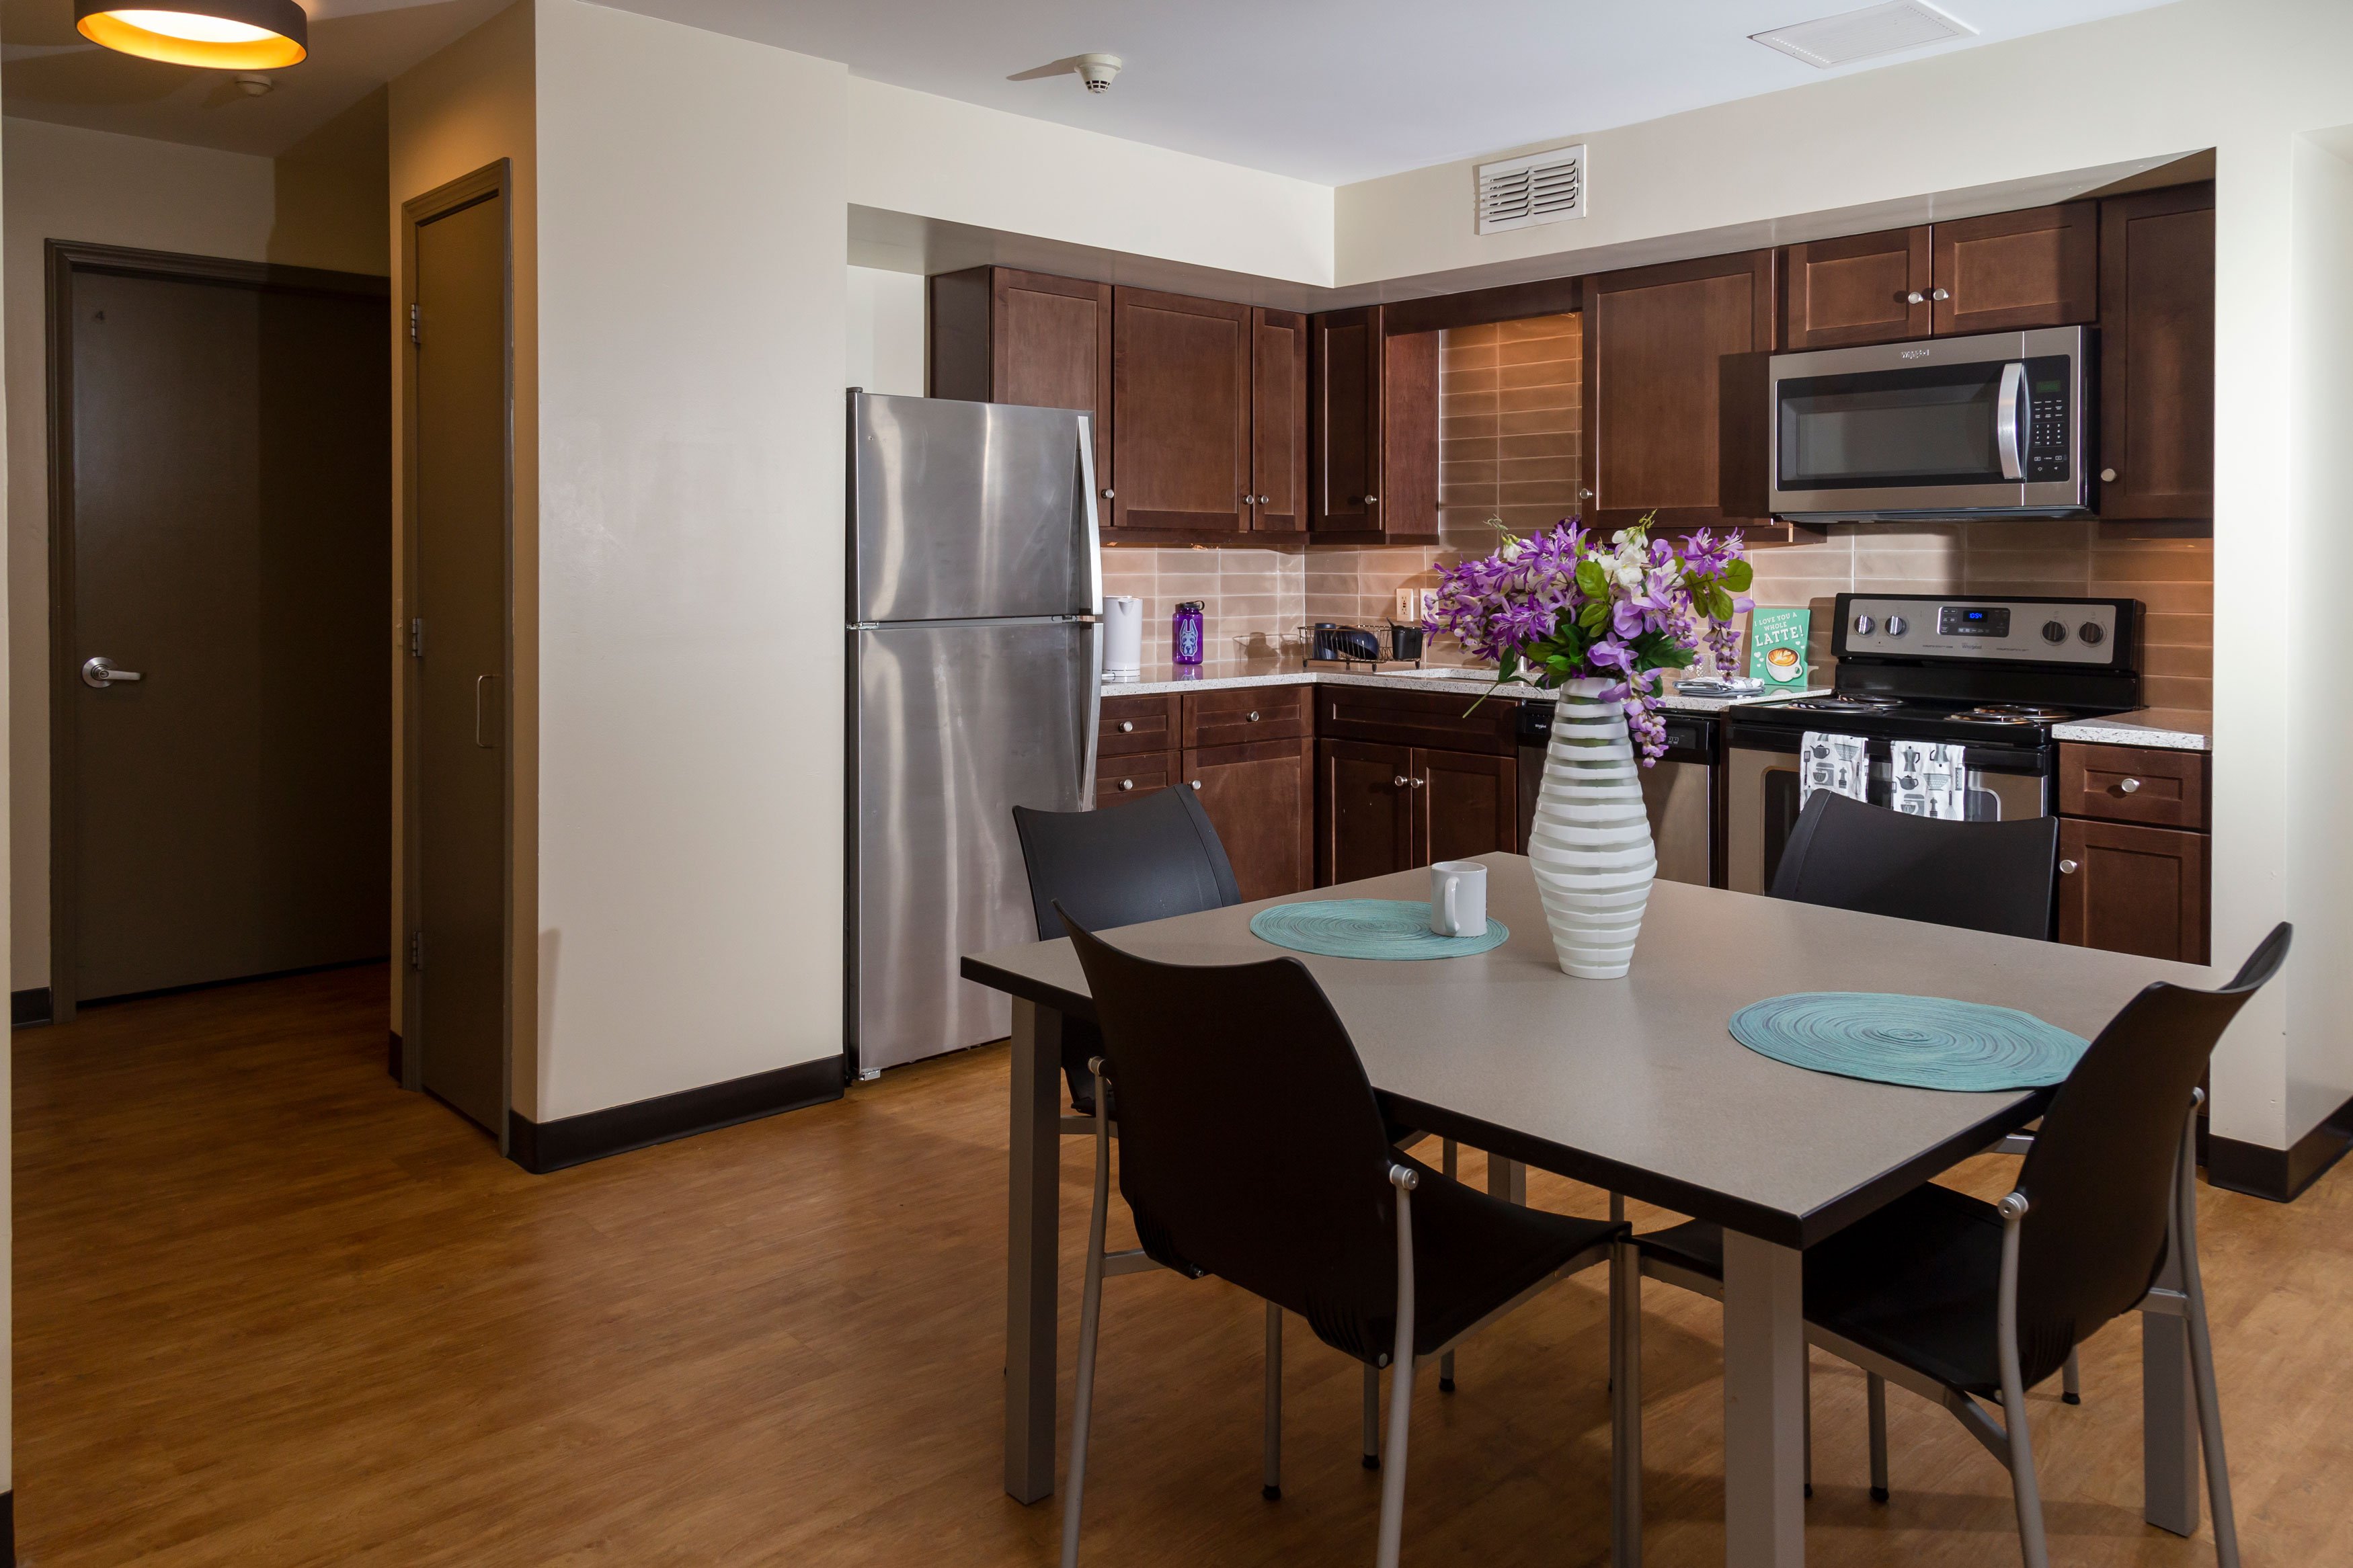 An upgraded kitchen inside an Empire Commons apartment, with stainless steel appliances, dark wood cabinets and a four-seater table.